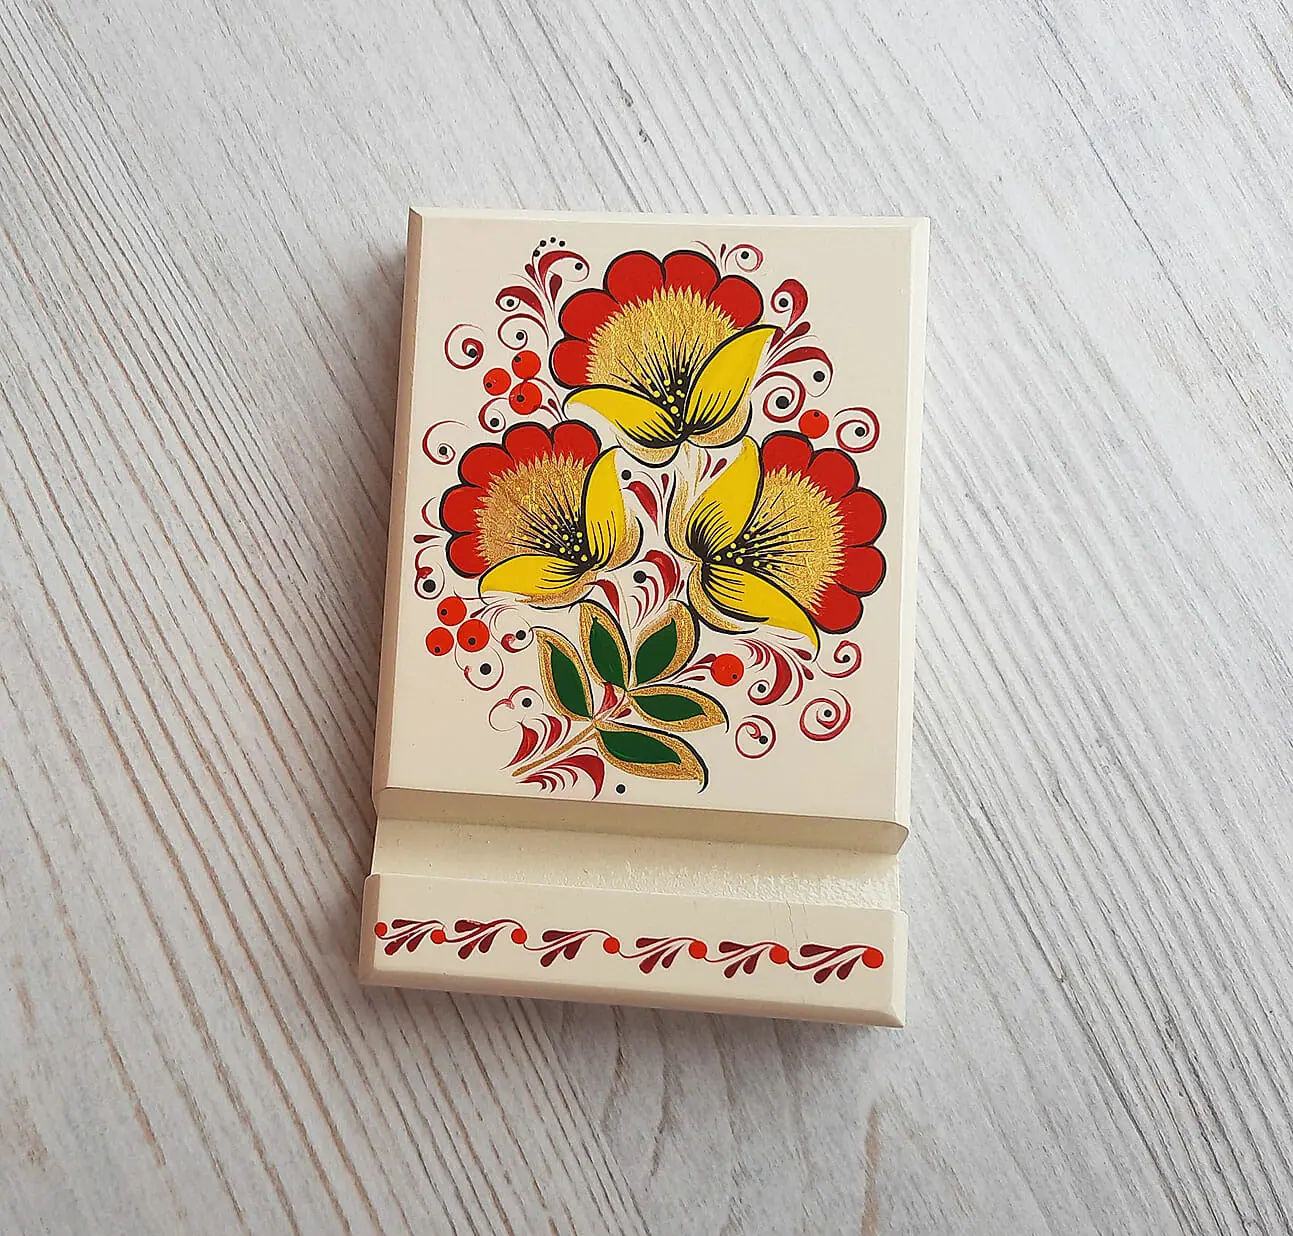 khokhloma painting wooden phone stand hand-painted